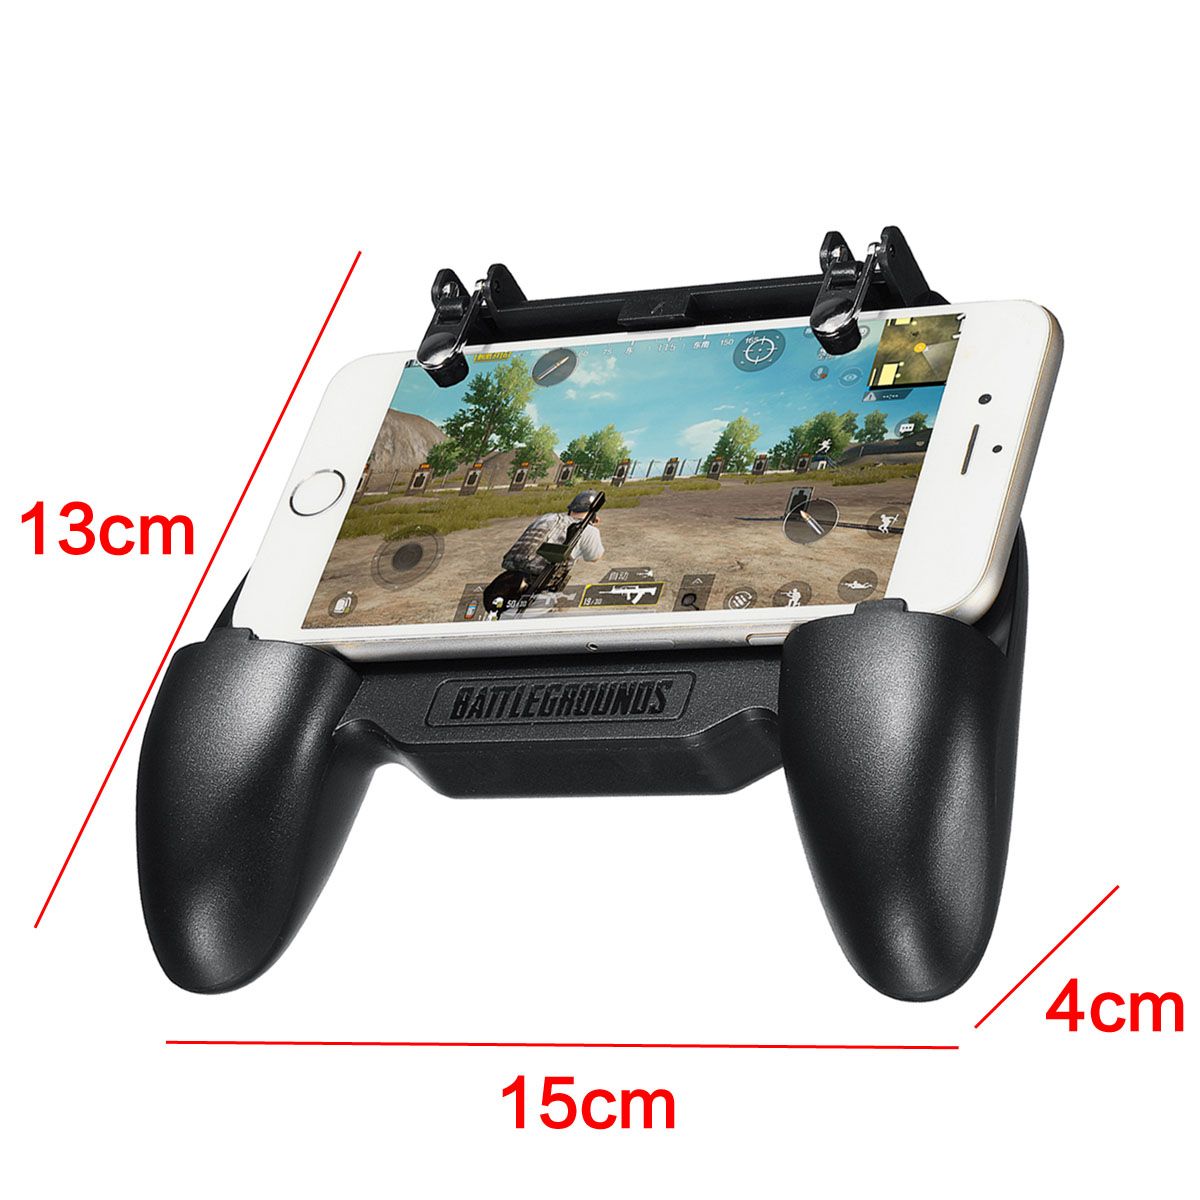 SR-Scalable-Gamepad-Game-Controller-Joystick-Cooling-Fans-Charger-for-PUBG-for-47-65inch-Mobile-Phon-1411923